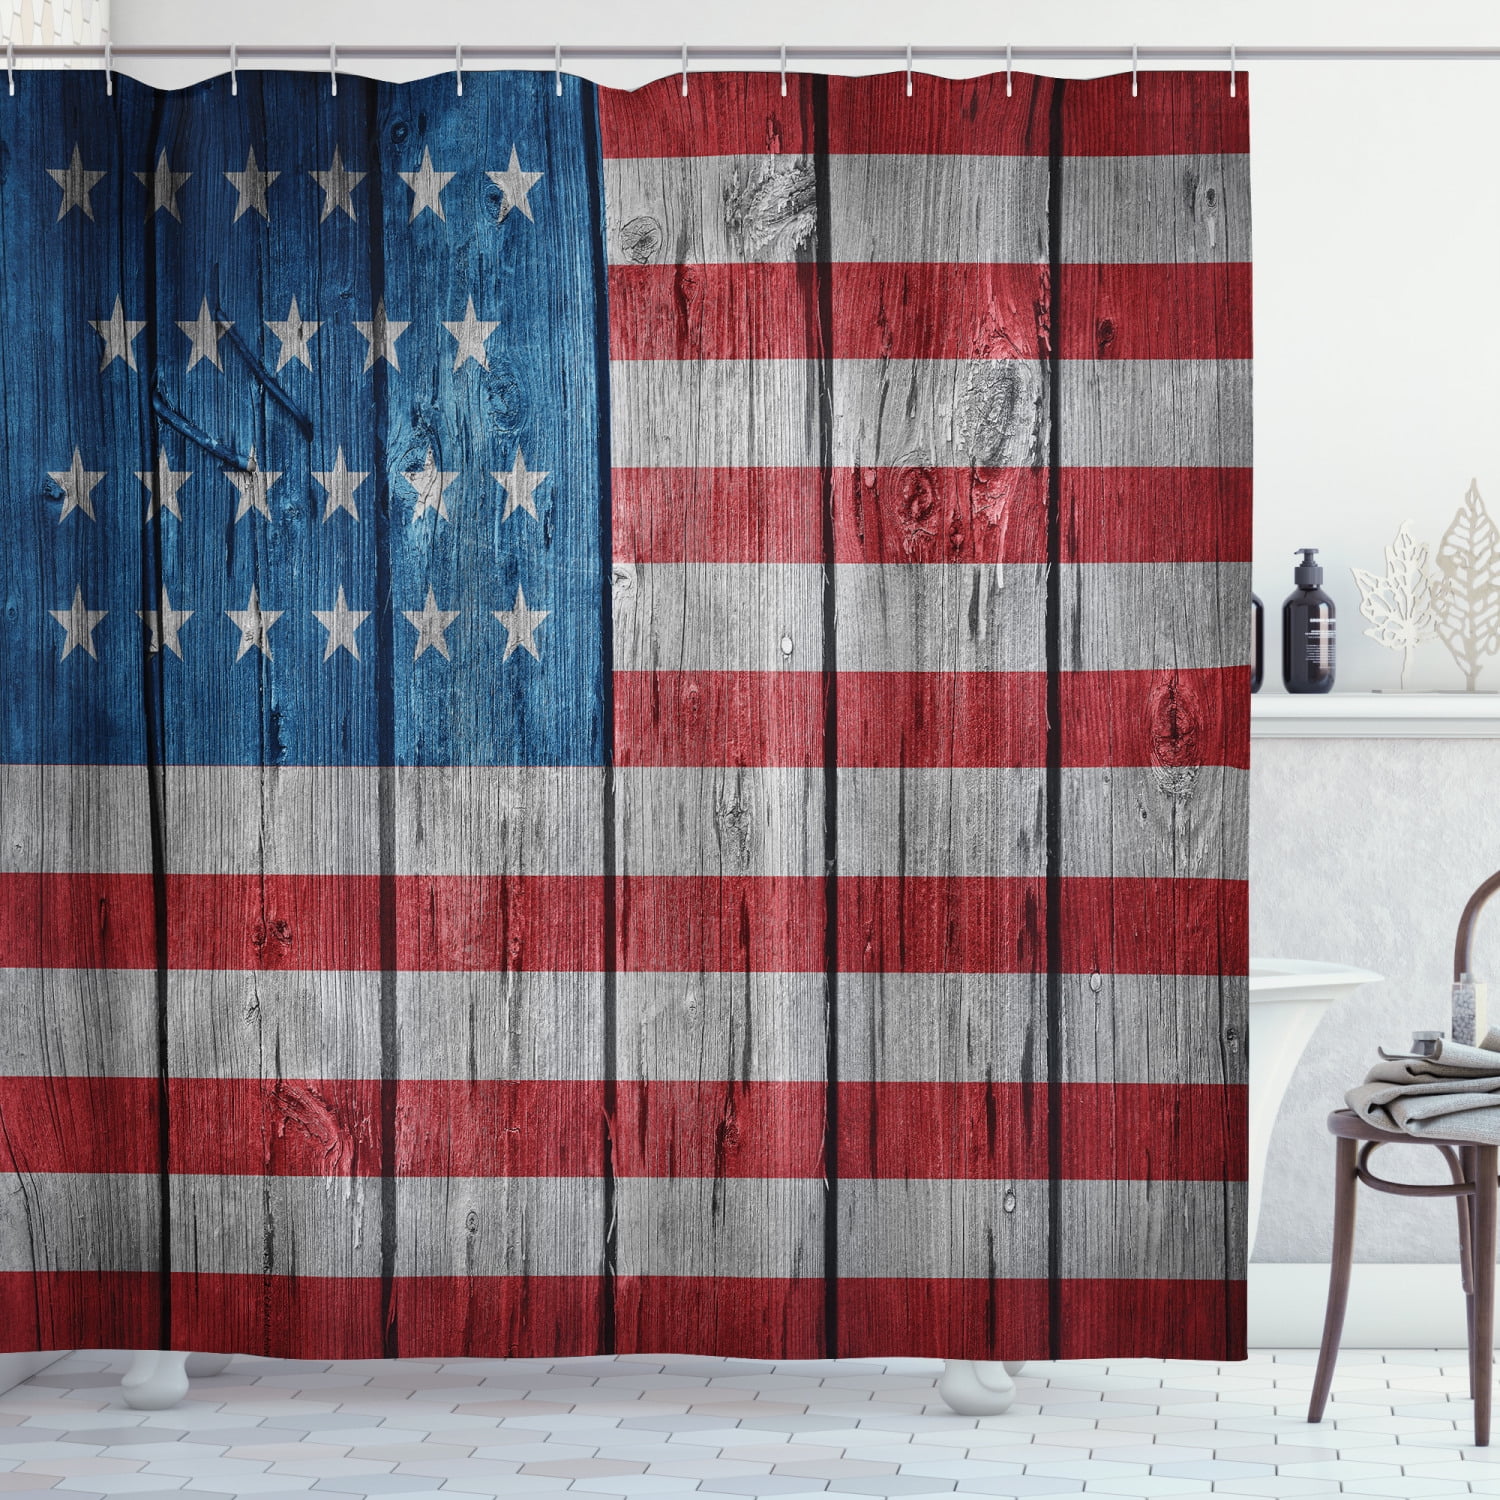 Details about   President's Day USA Flag Blue and Red Balloons Shower Curtain Set Bathroom Decor 